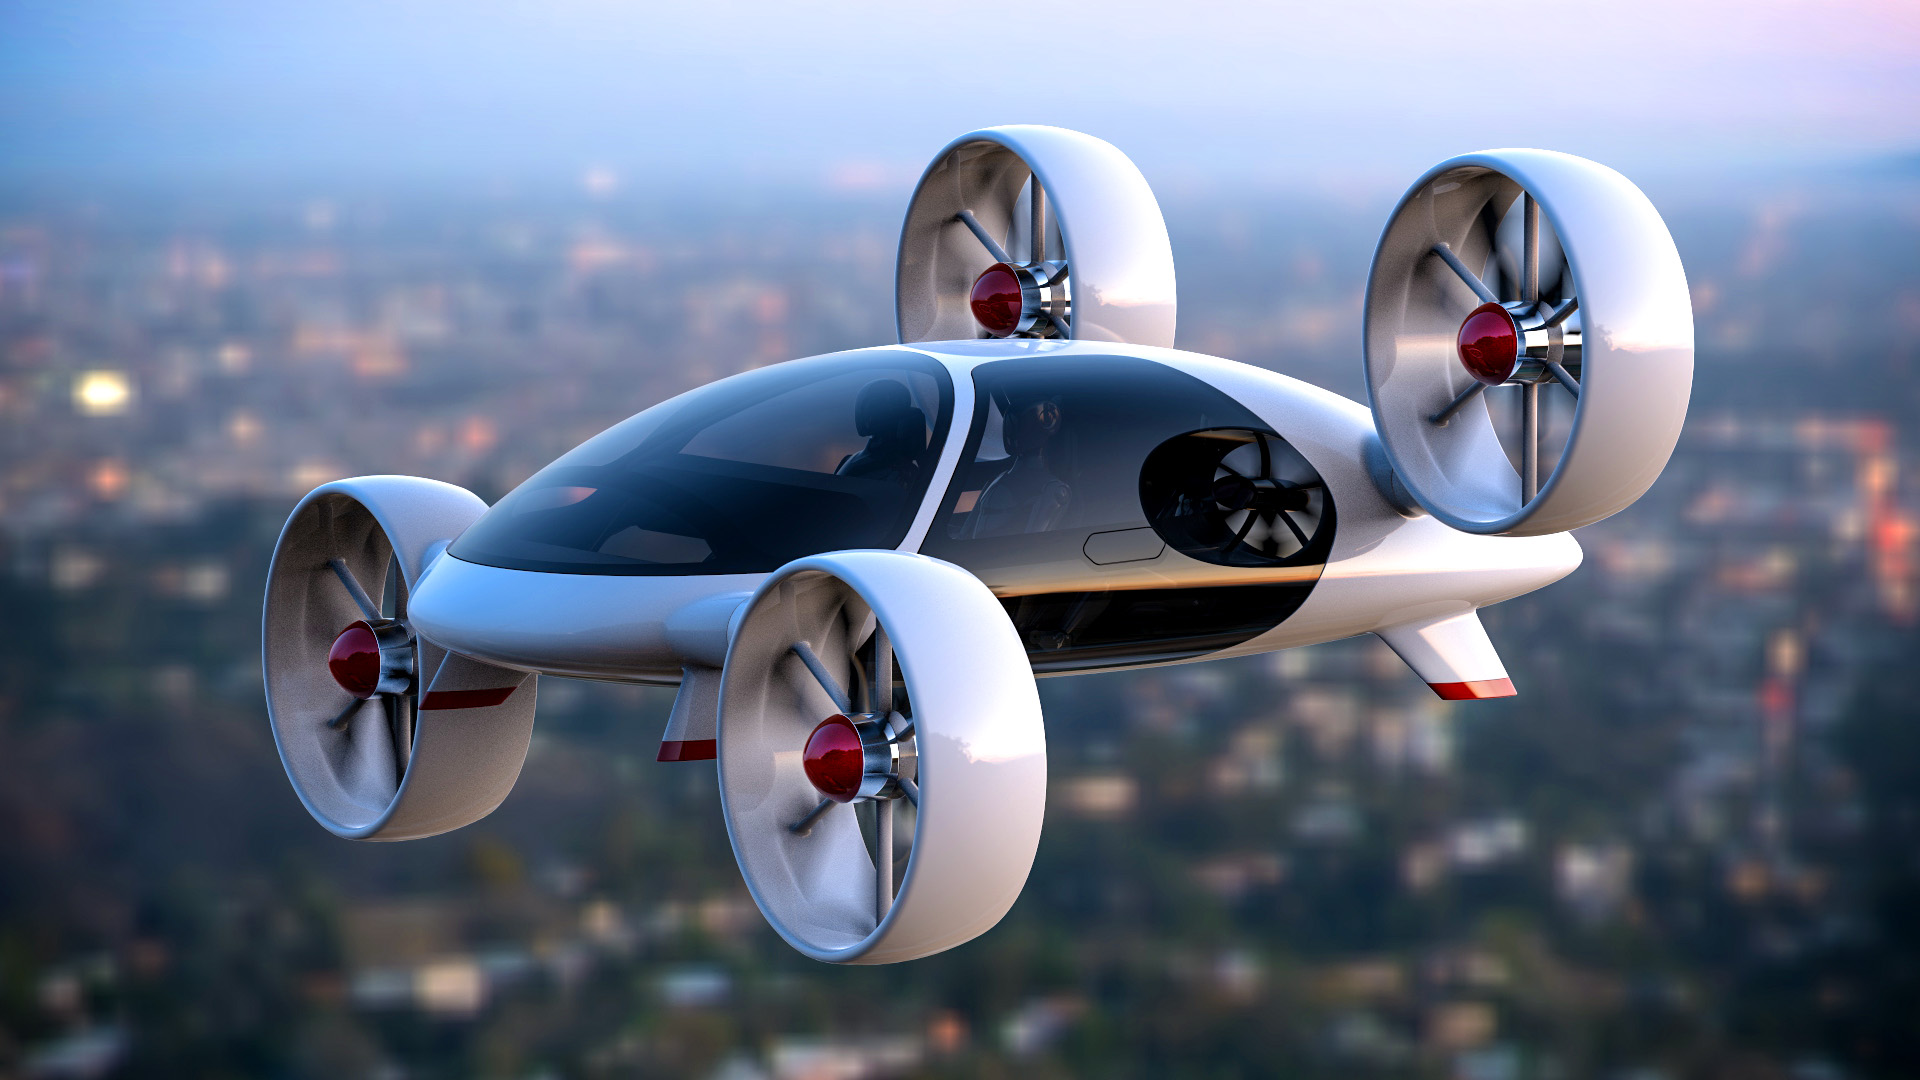 Flying cars are real and going to be in skies soon - Town of Technology